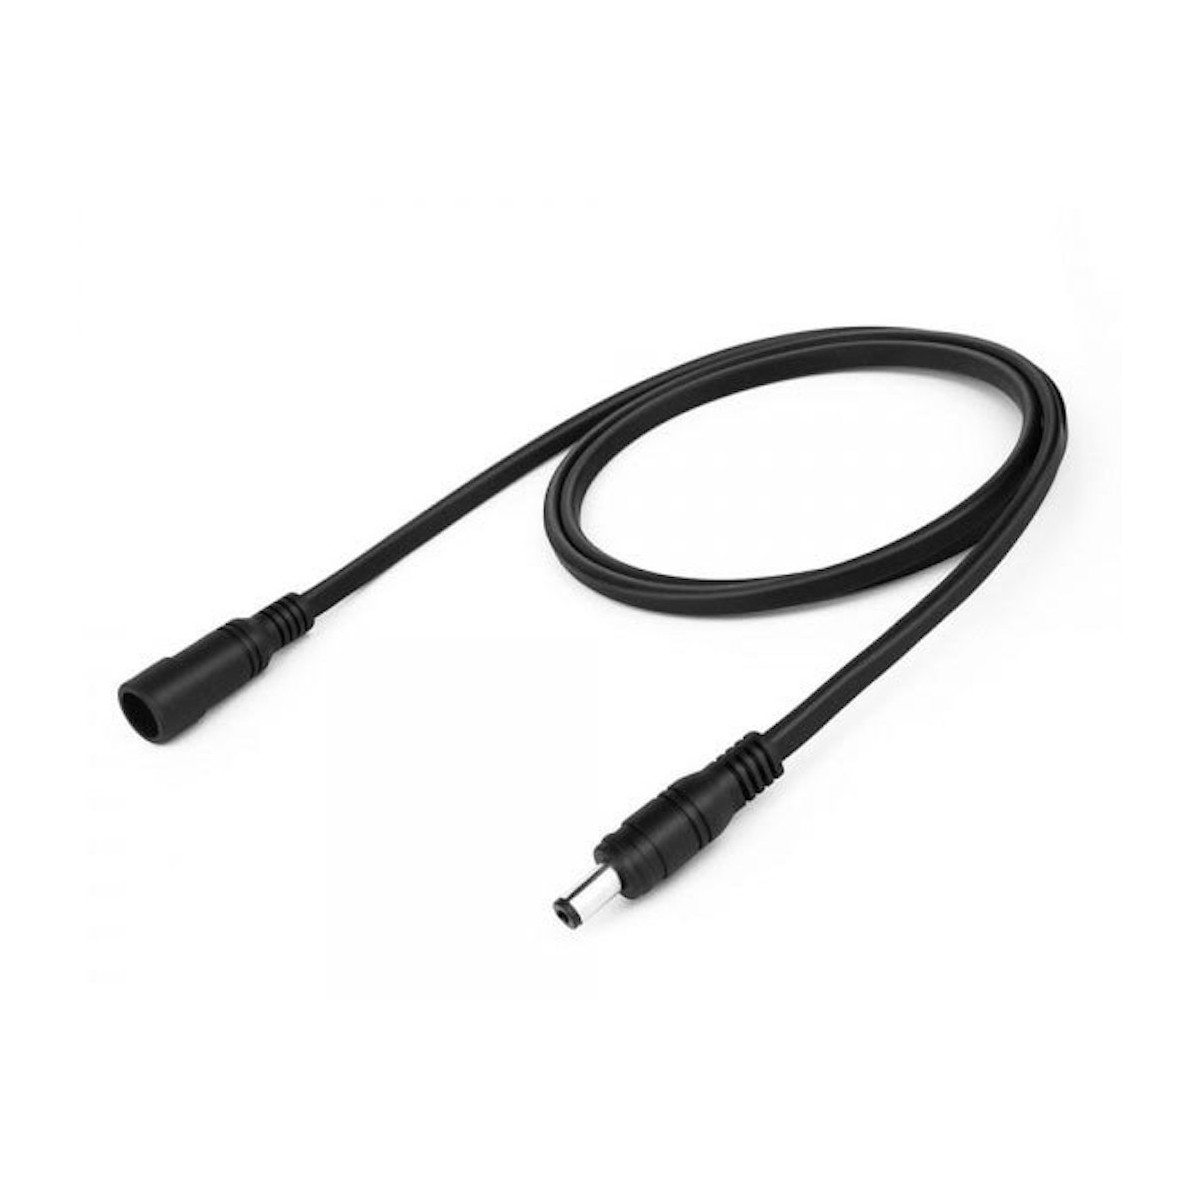 MAGICSHINE light cable extension